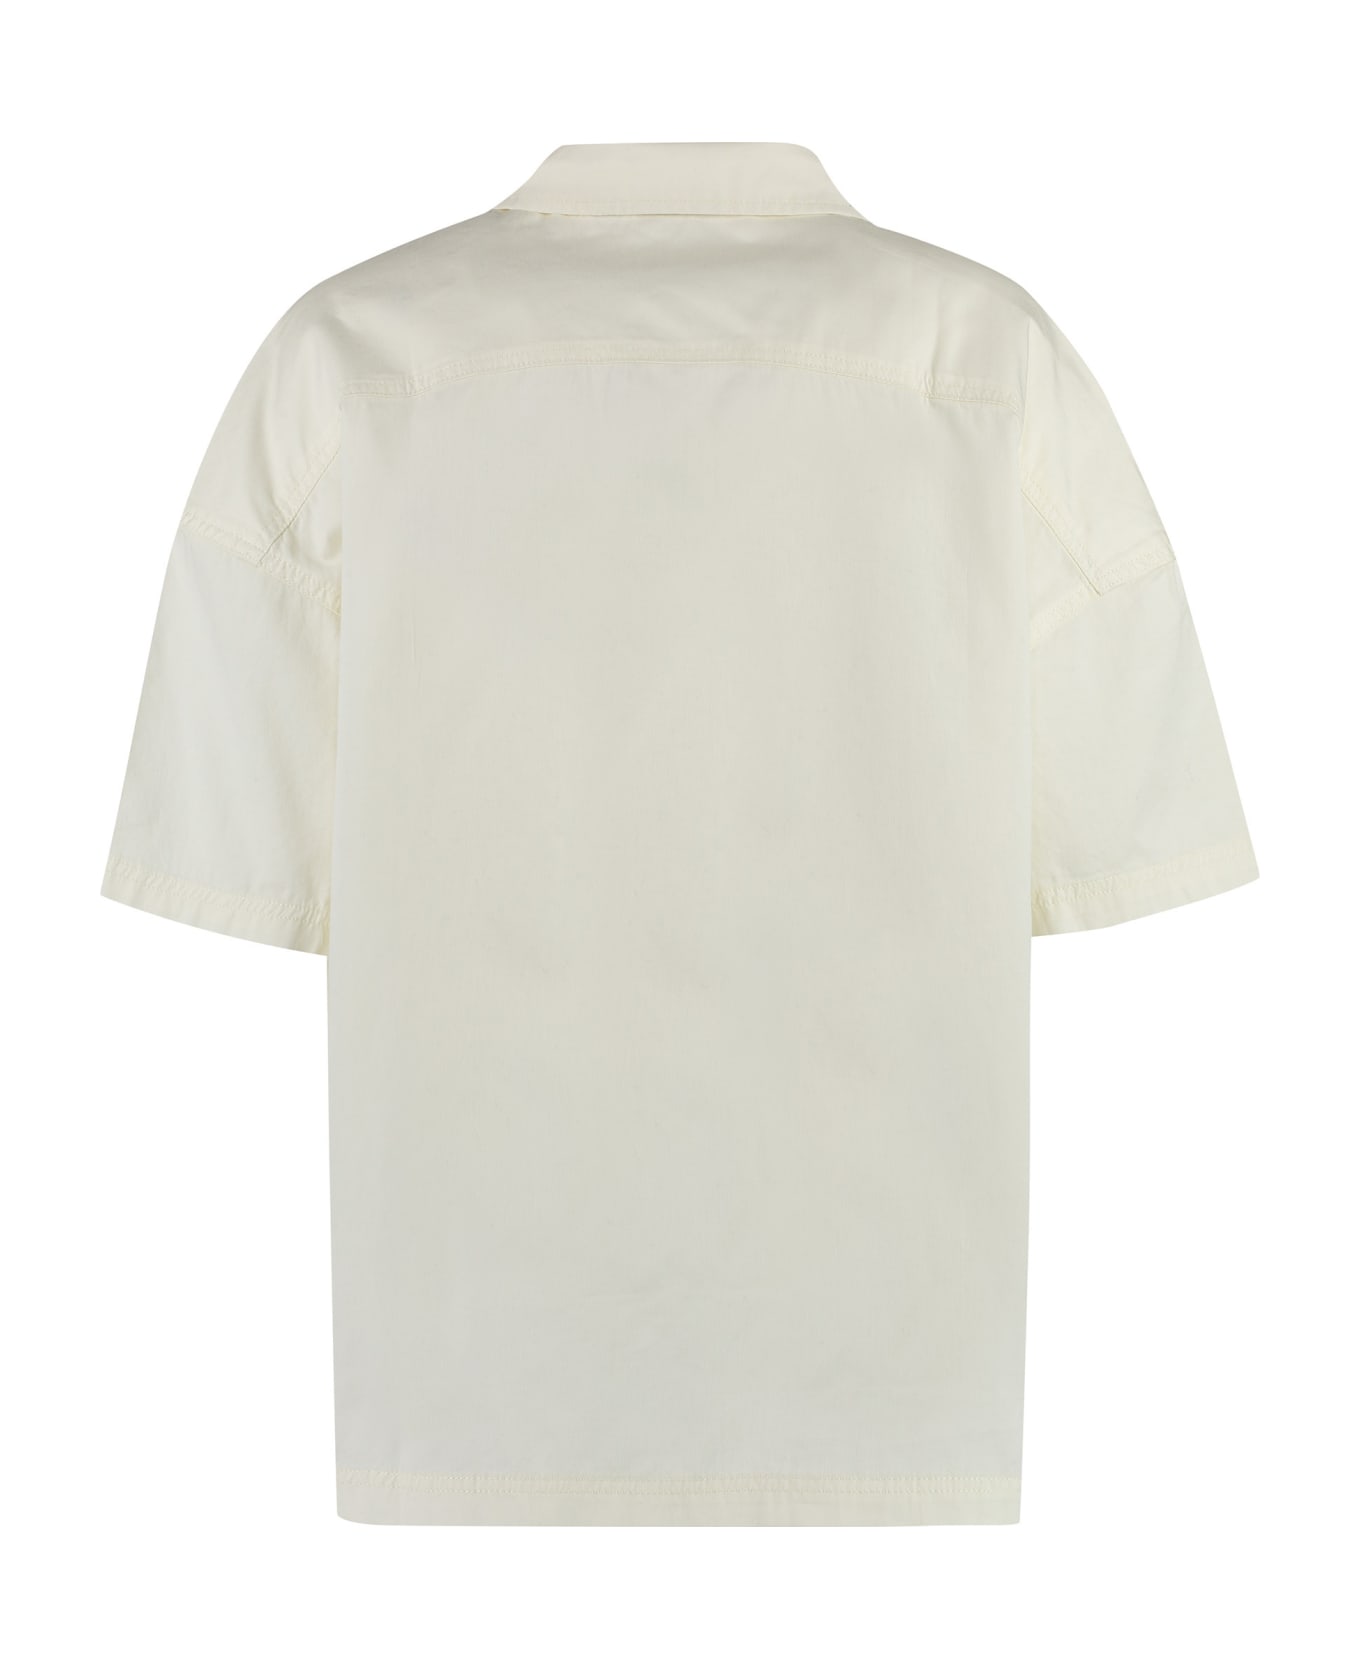 Dickies Vale Short Sleeve Cotton Shirt - Ivory シャツ